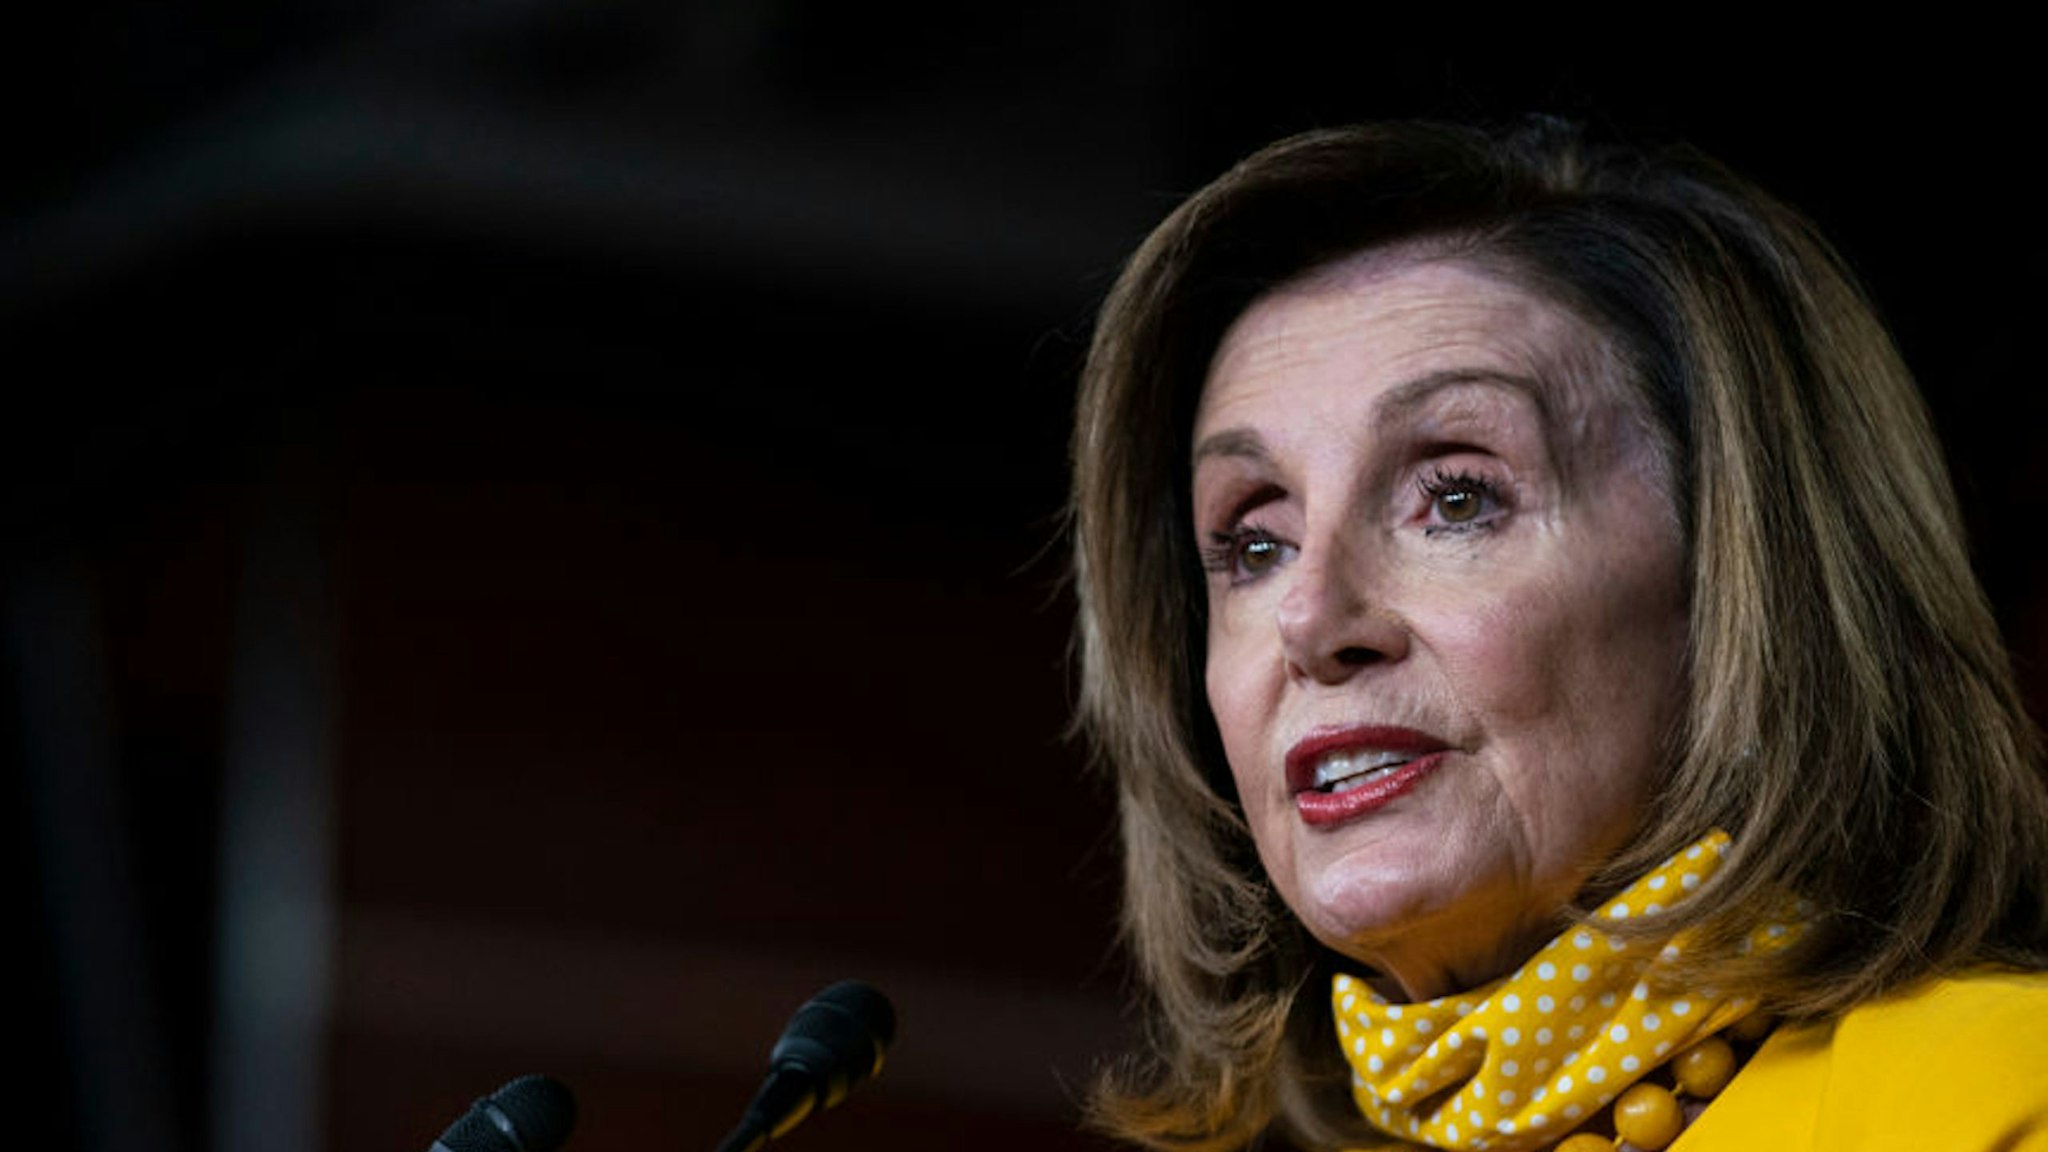 WASHINGTON, DC - JUNE 11: U.S. Speaker of the House Rep. Nancy Pelosi (D-CA) speaks during a weekly news conference on June 11, 2020 in Washington, DC. Speaker Pelosi discussed various topics including the Black Lives Matter movement and coronavirus. (